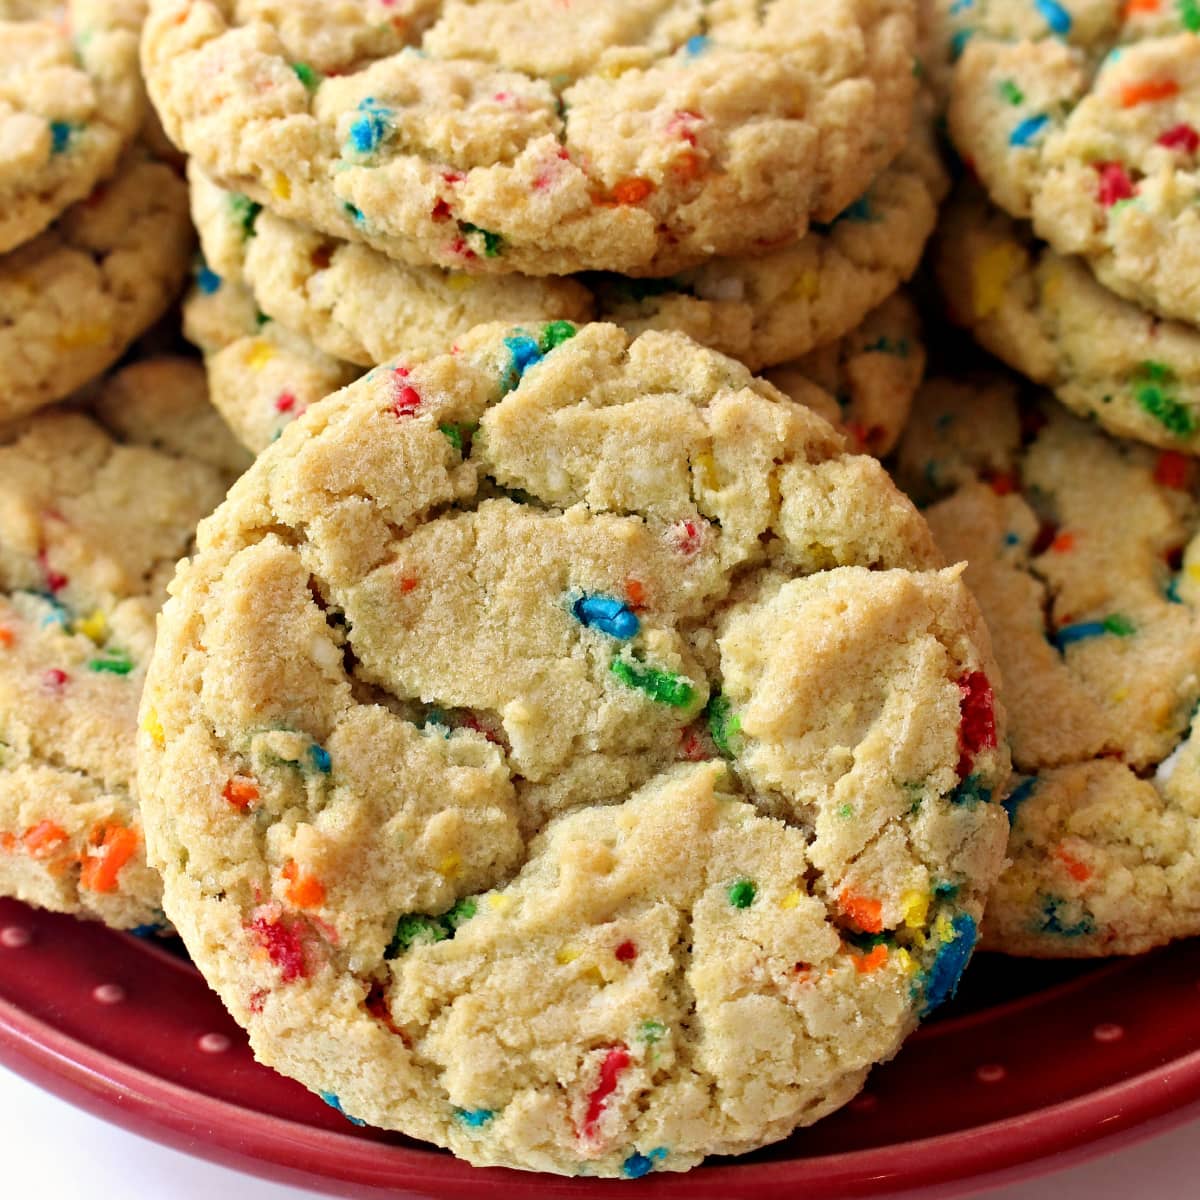 Closeup showing crackled cookie top and bright colored sprinkles baked into the dough.